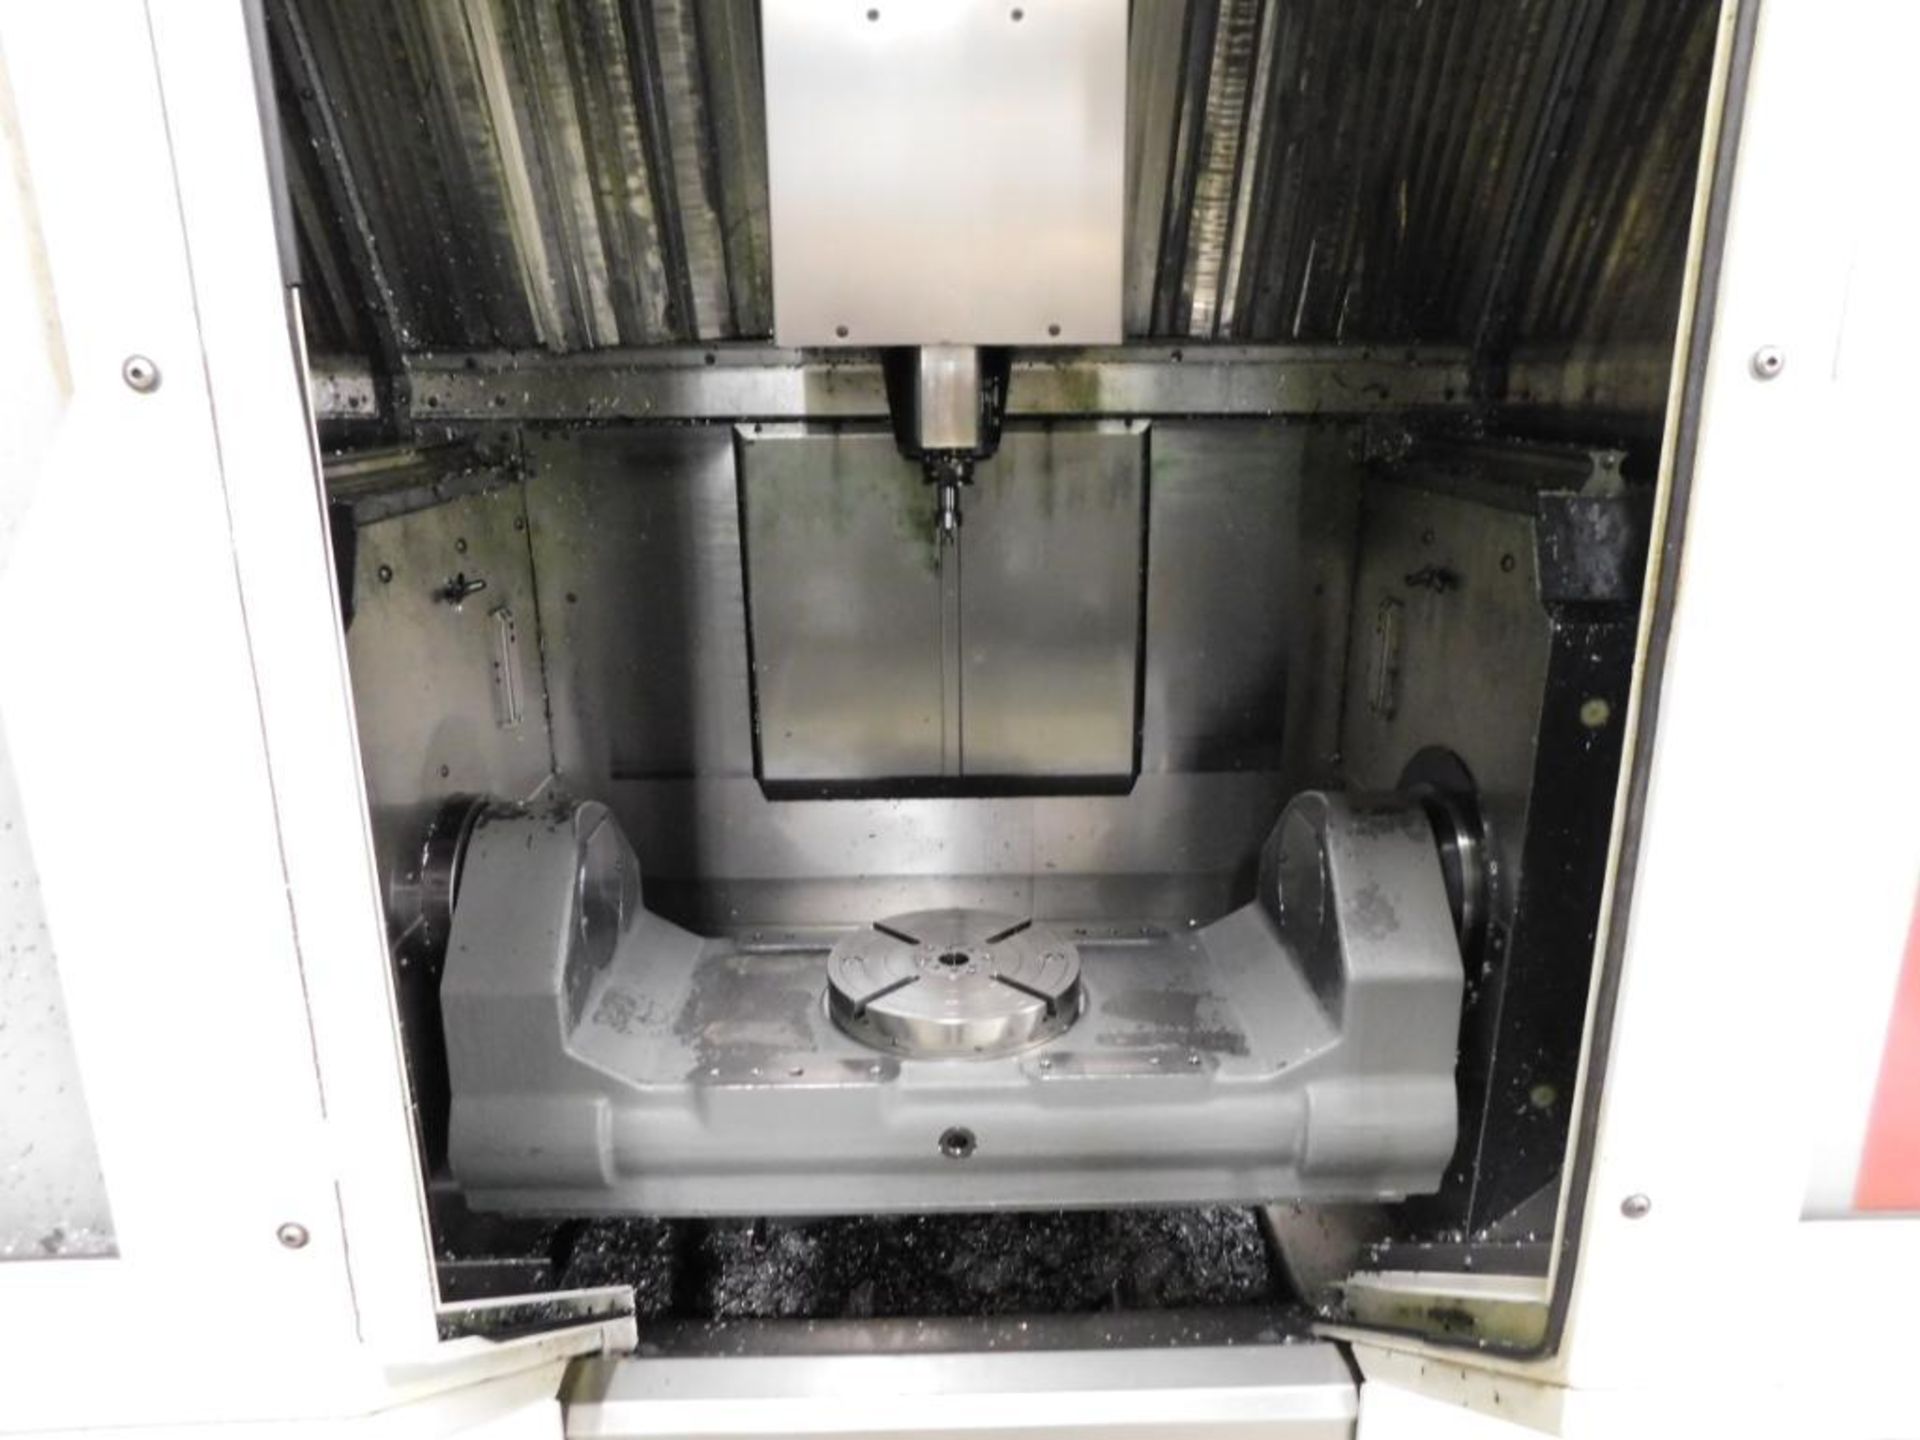 Hermle 5-Axis CNC Vertical Machining Center, Model C20U, S/N 17955 (2006), 16,000 RPM, 20 HP, HSK63, - Image 4 of 6